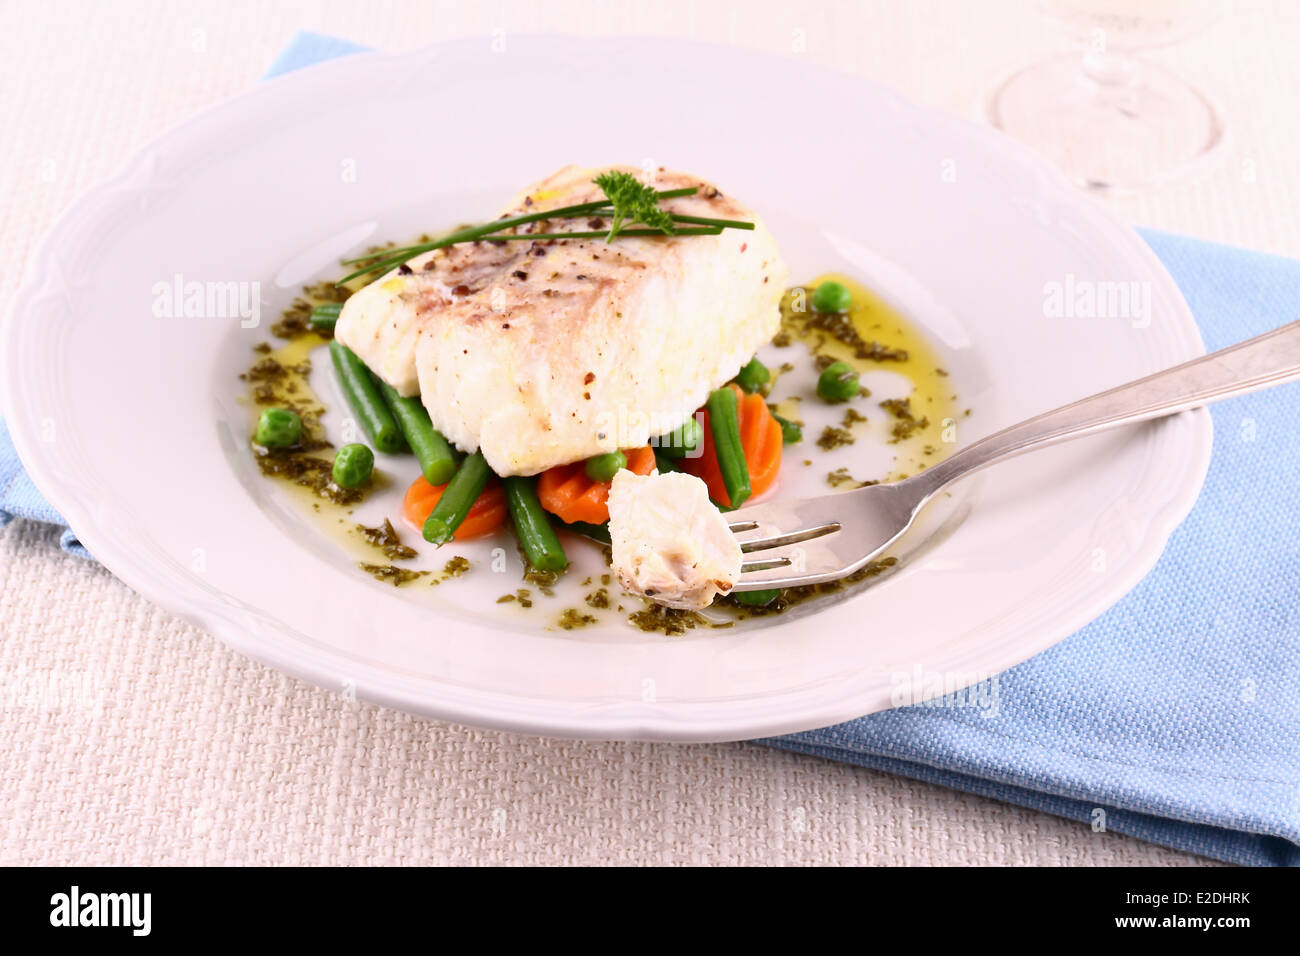 Cod fillet on fork with green beans, peas, parsley, olive oil, close up Stock Photo